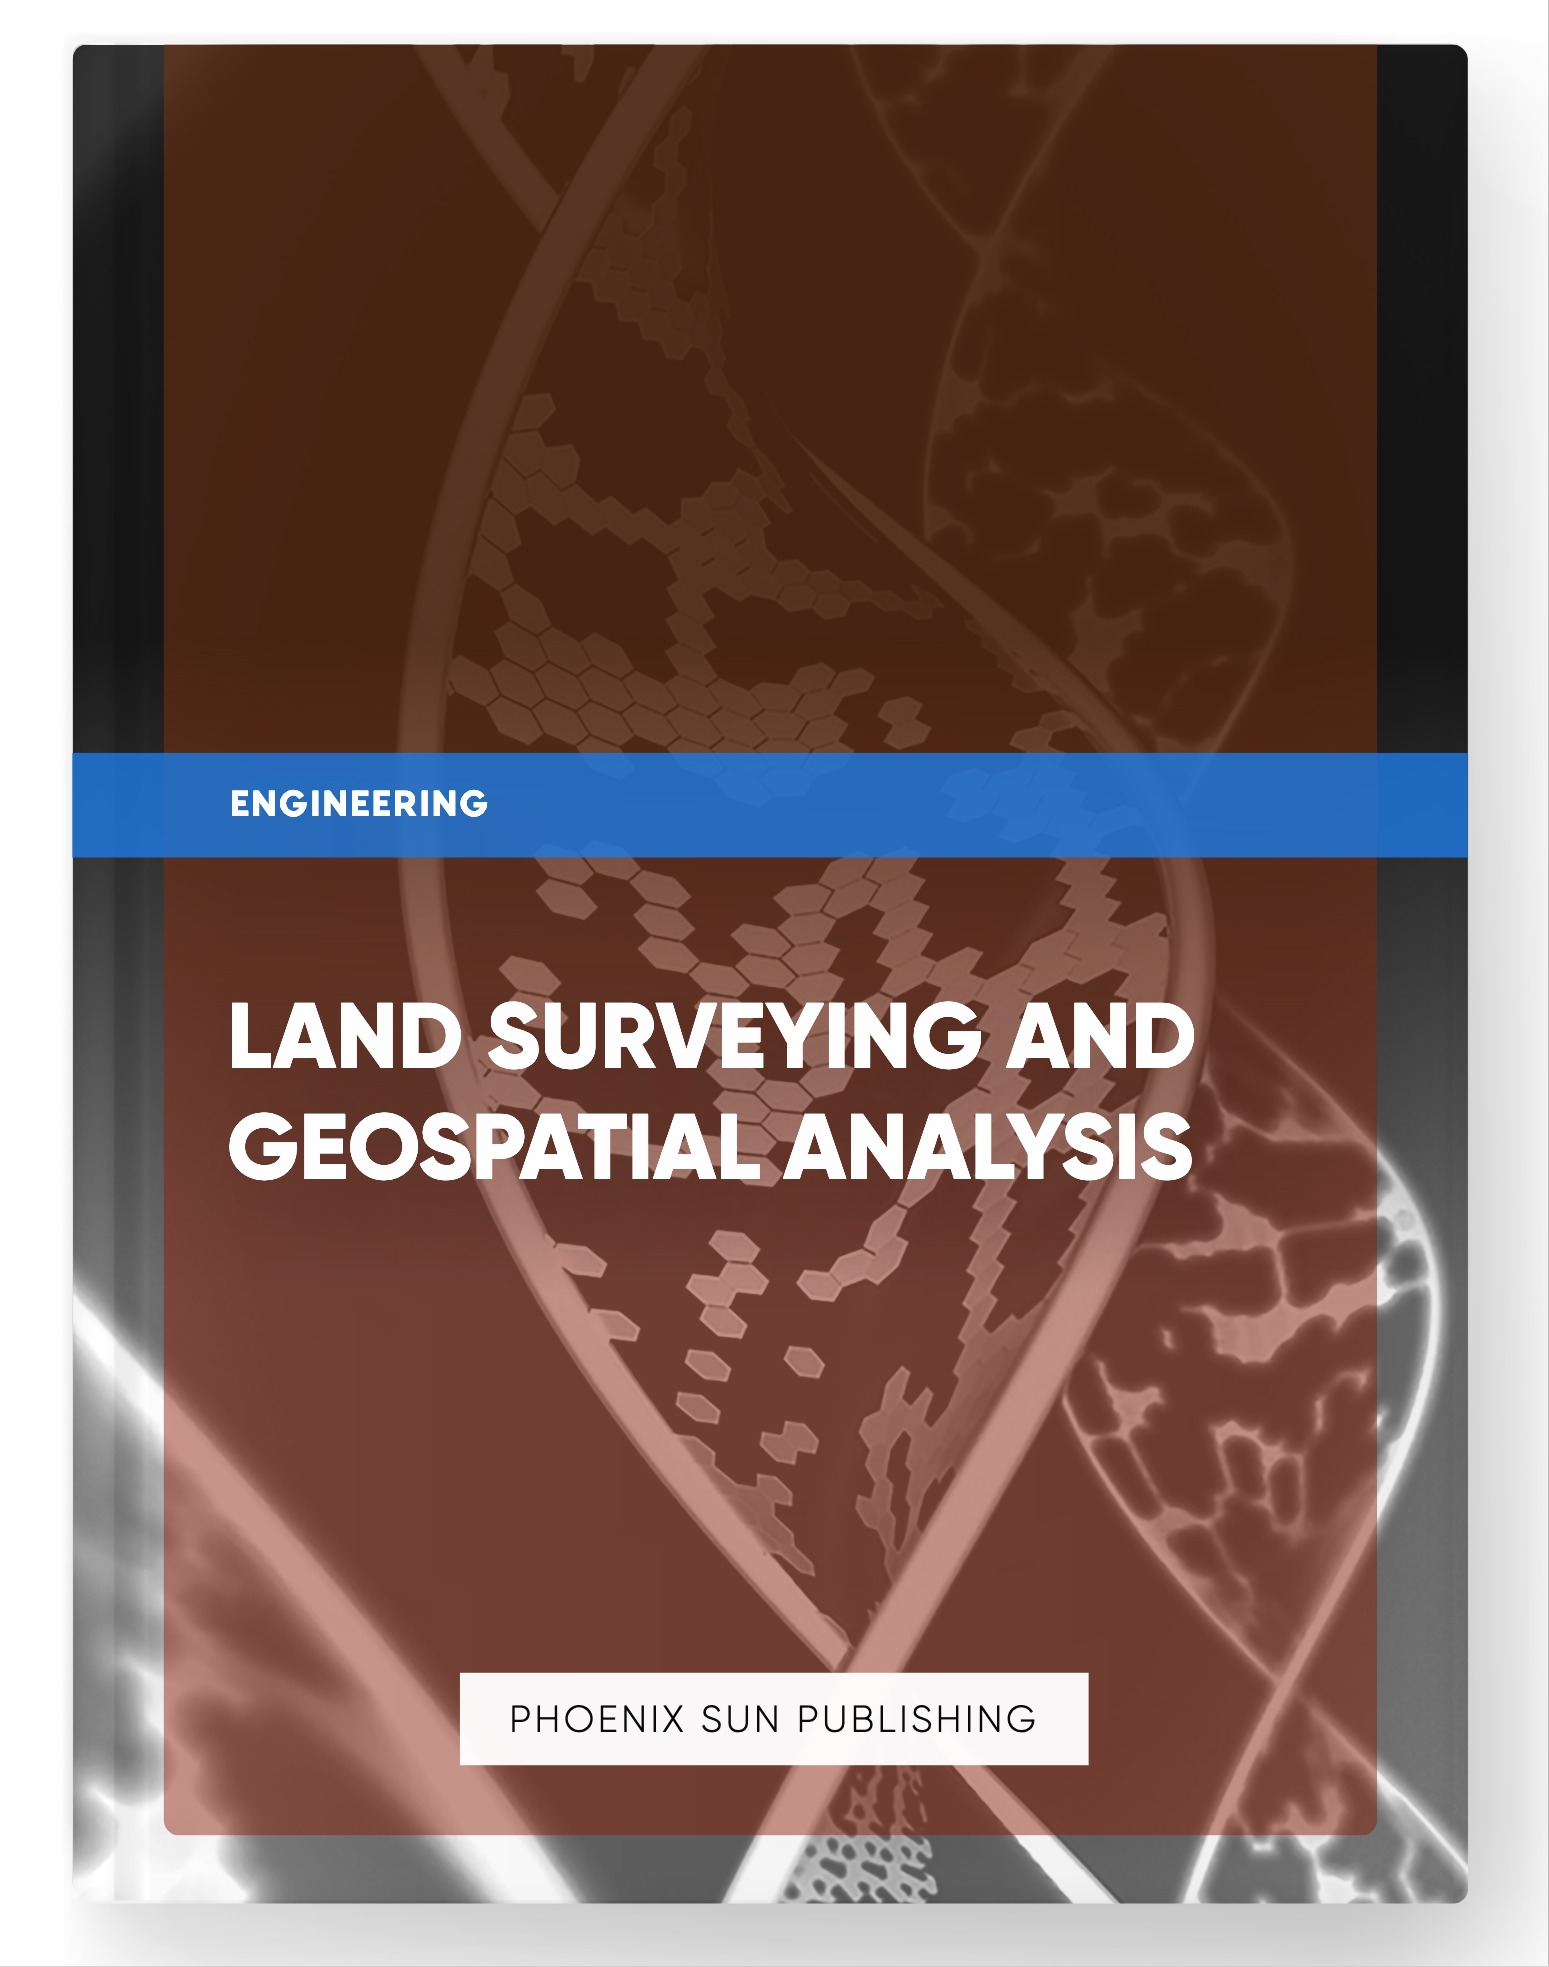 Land Surveying and Geospatial Analysis